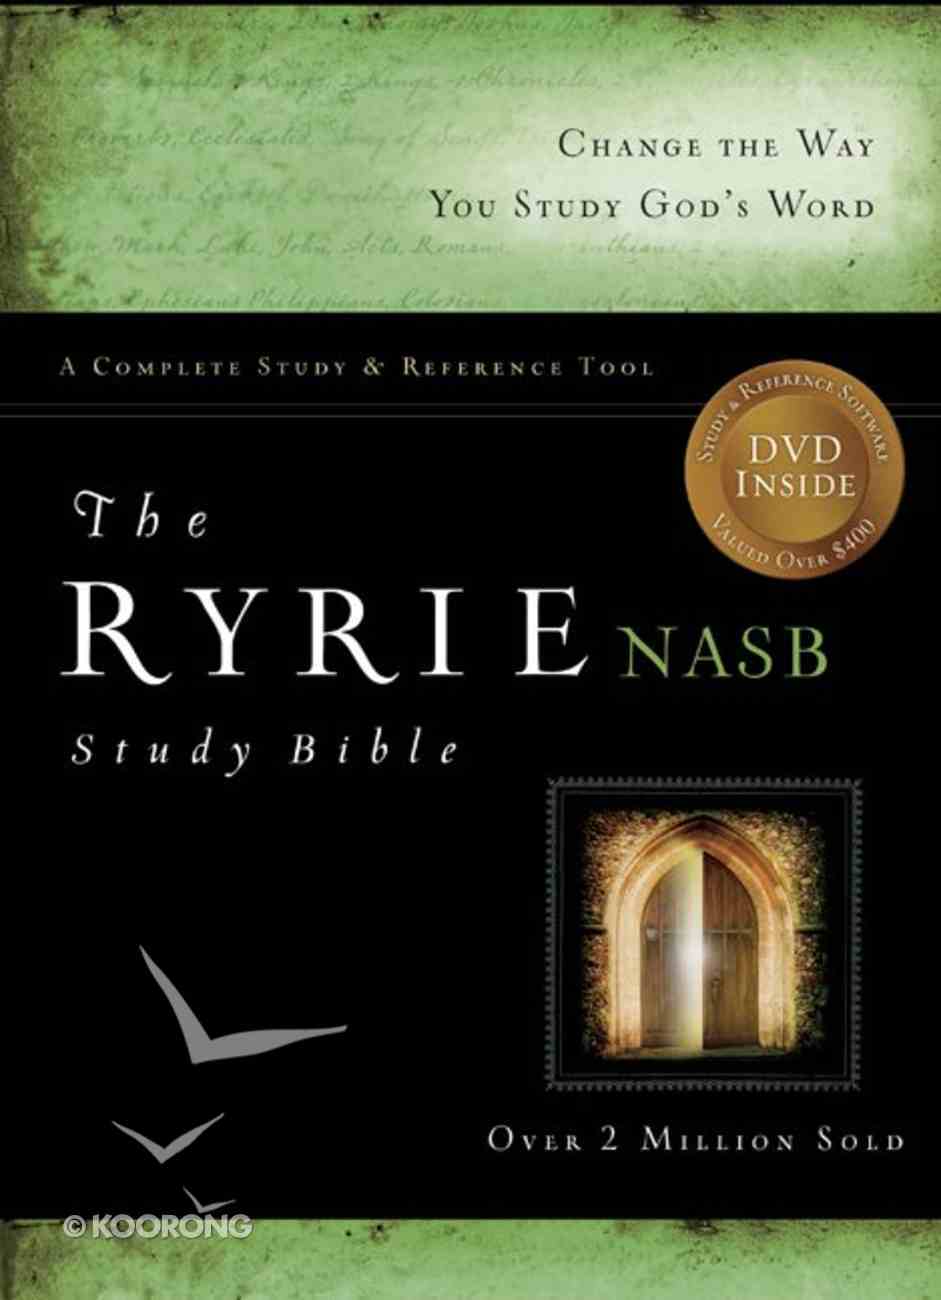 charles ryrie systematic theology pdf